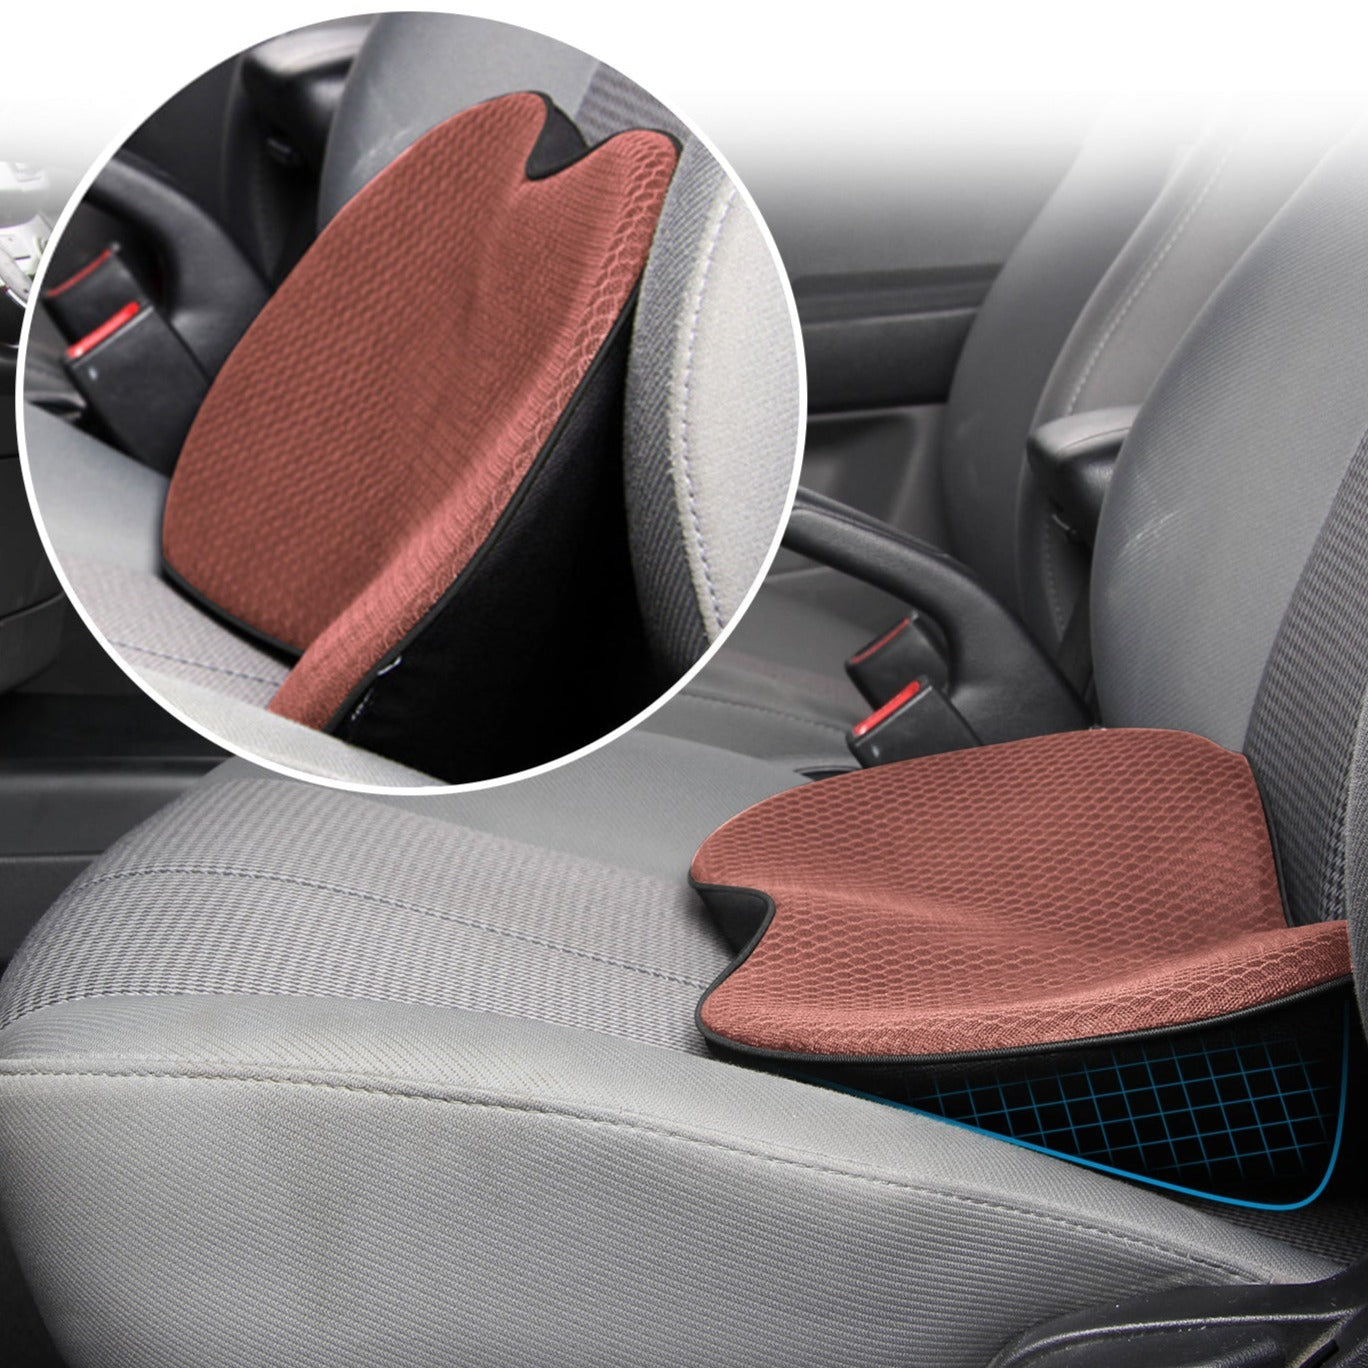 QYILAY Leather Car Memory Foam Heightening Seat Cushion for Short People  Driving, Sciatica & Lower Back Pain Relief Pad,Black 